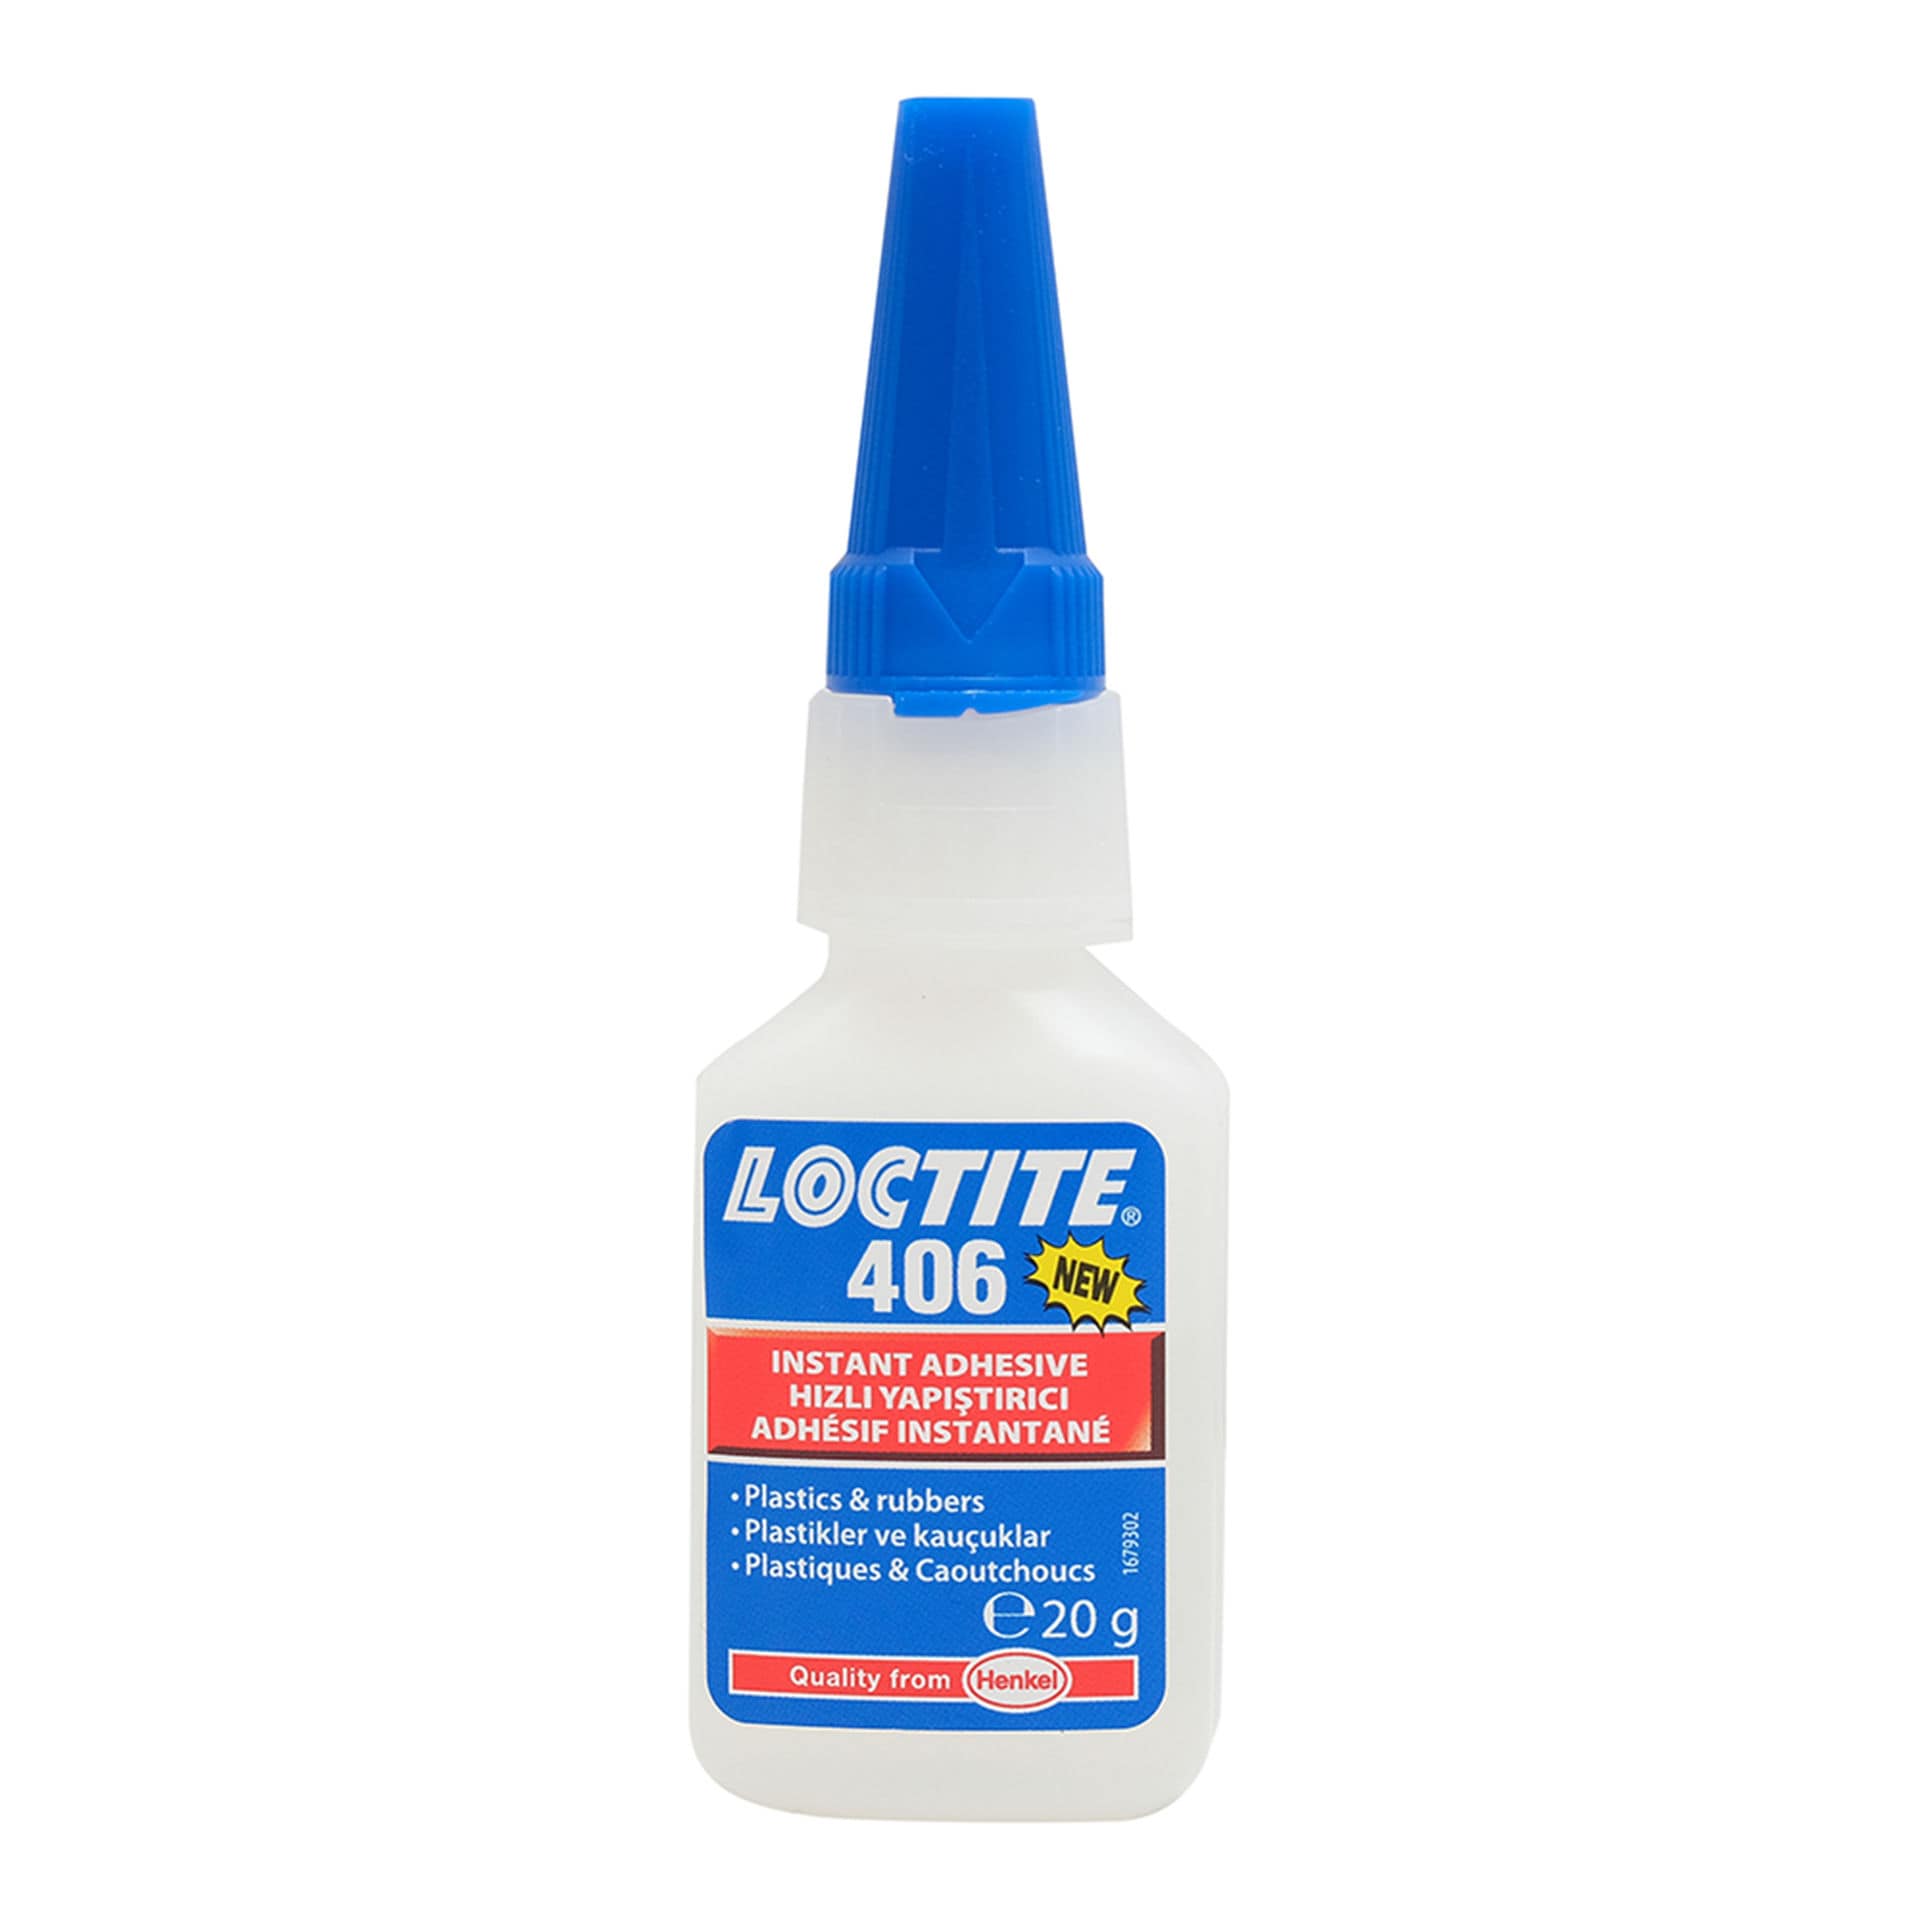 Shop Loctite 406 Instant Adhesive for Bonding, 20grams